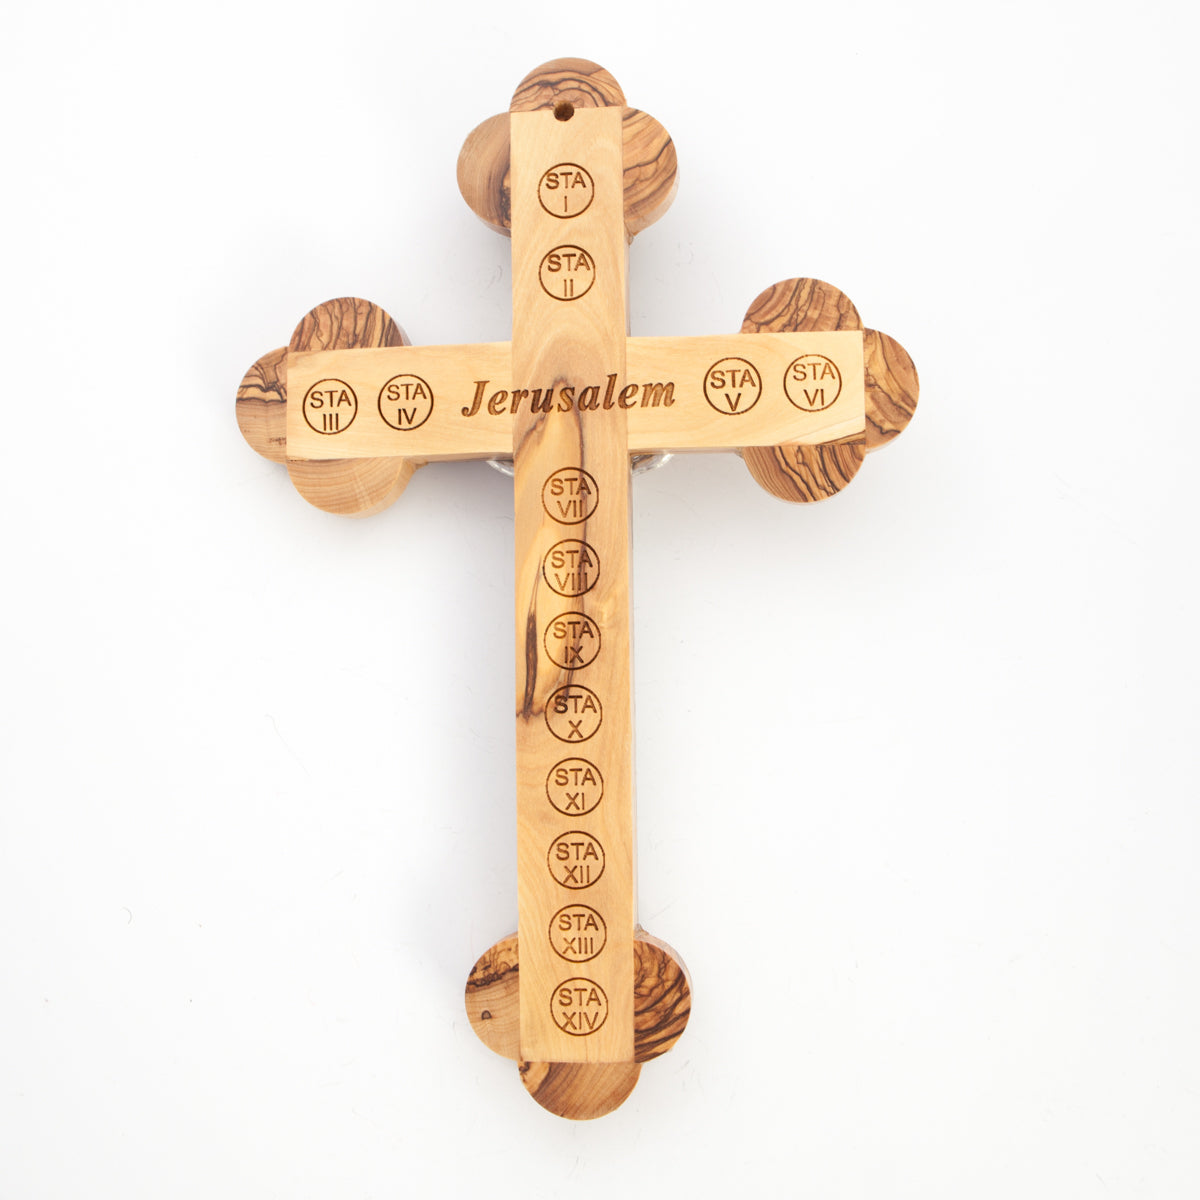 Olive Wood Crucifix with 14 Stations of the Cross Engraved Back Made Holy Land Christians Catholic Gift Home